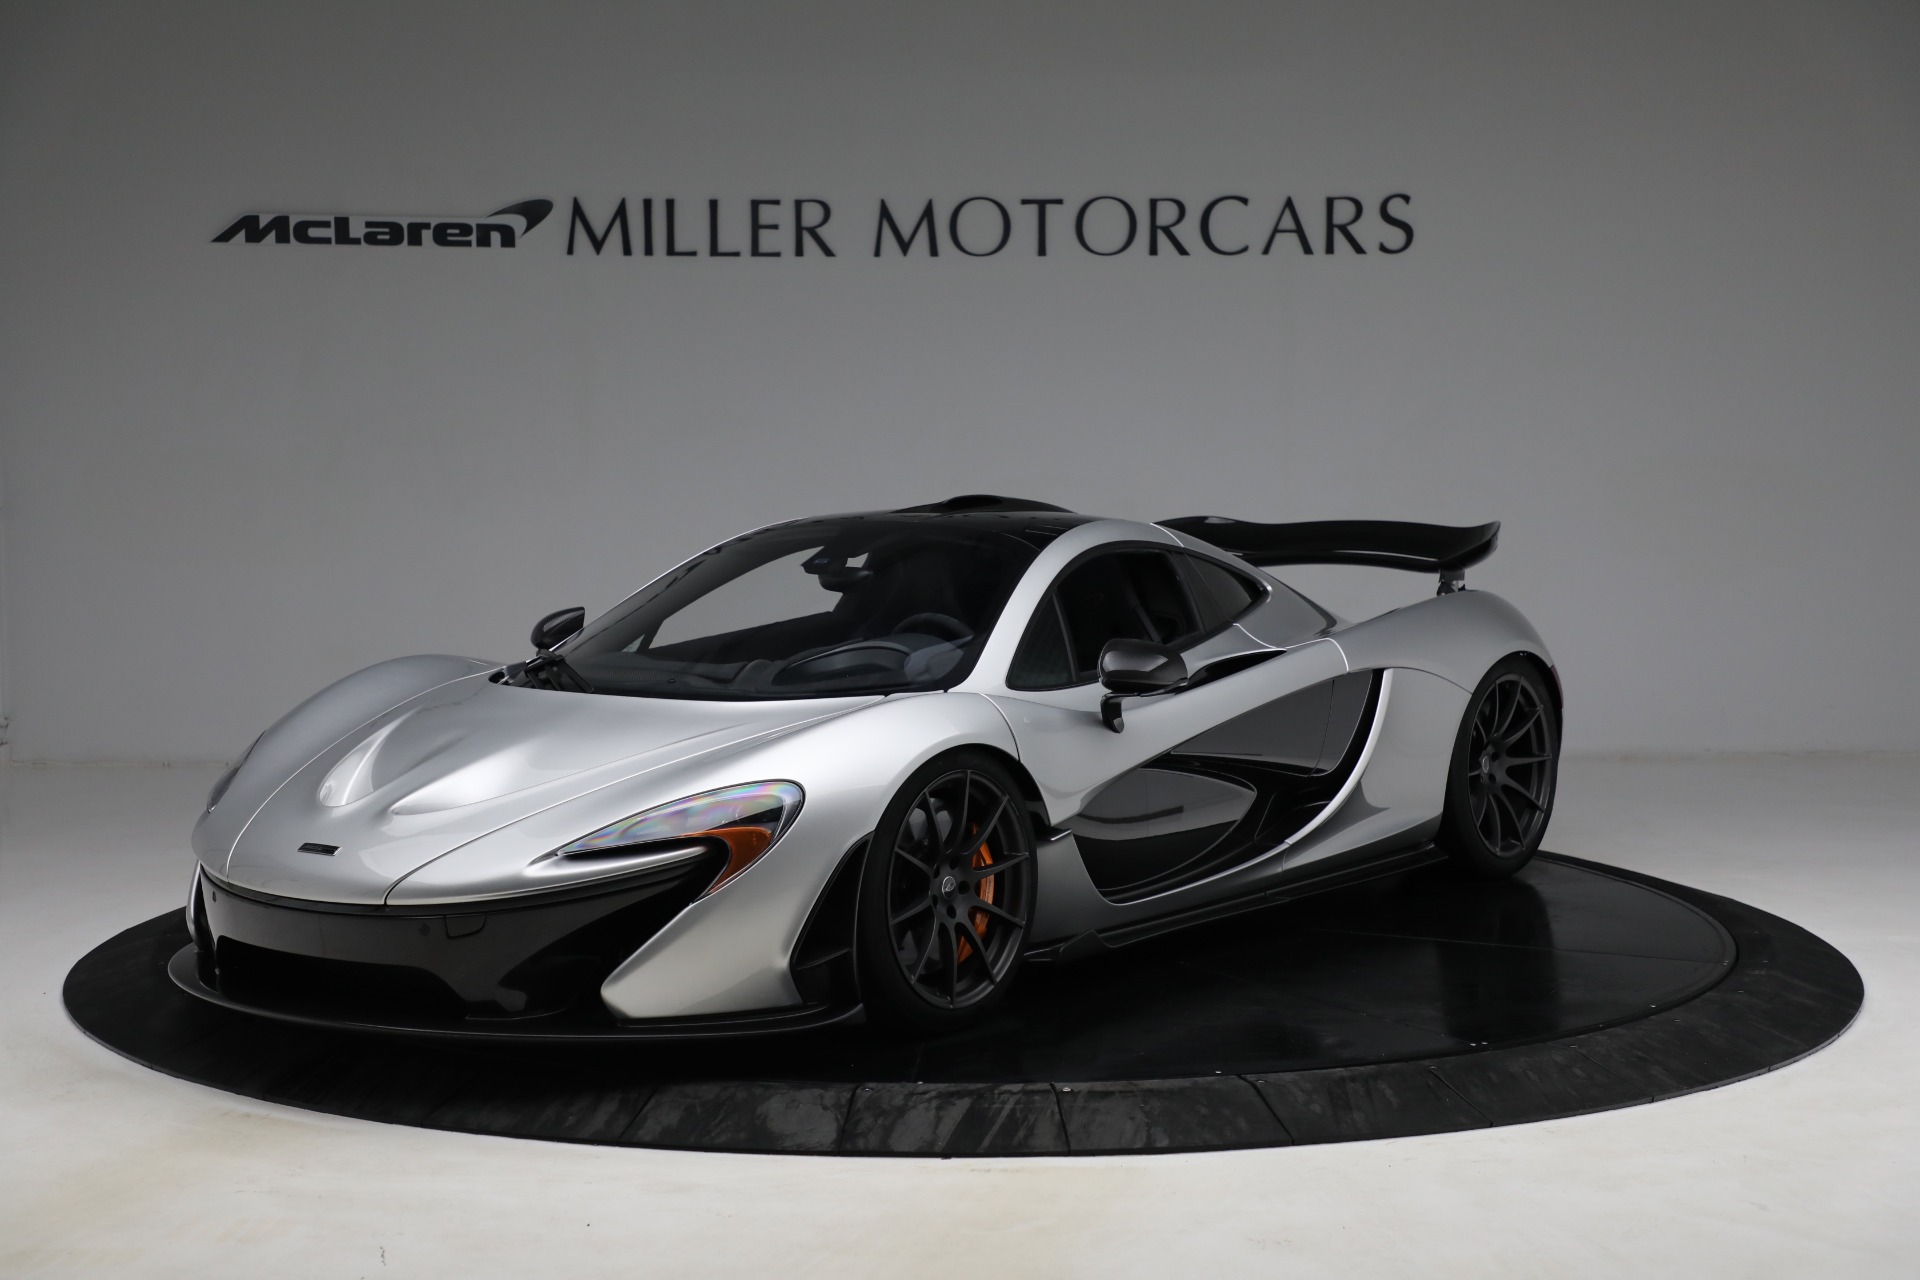 Used 2015 McLaren P1 for sale $1,825,000 at McLaren Greenwich in Greenwich CT 06830 1